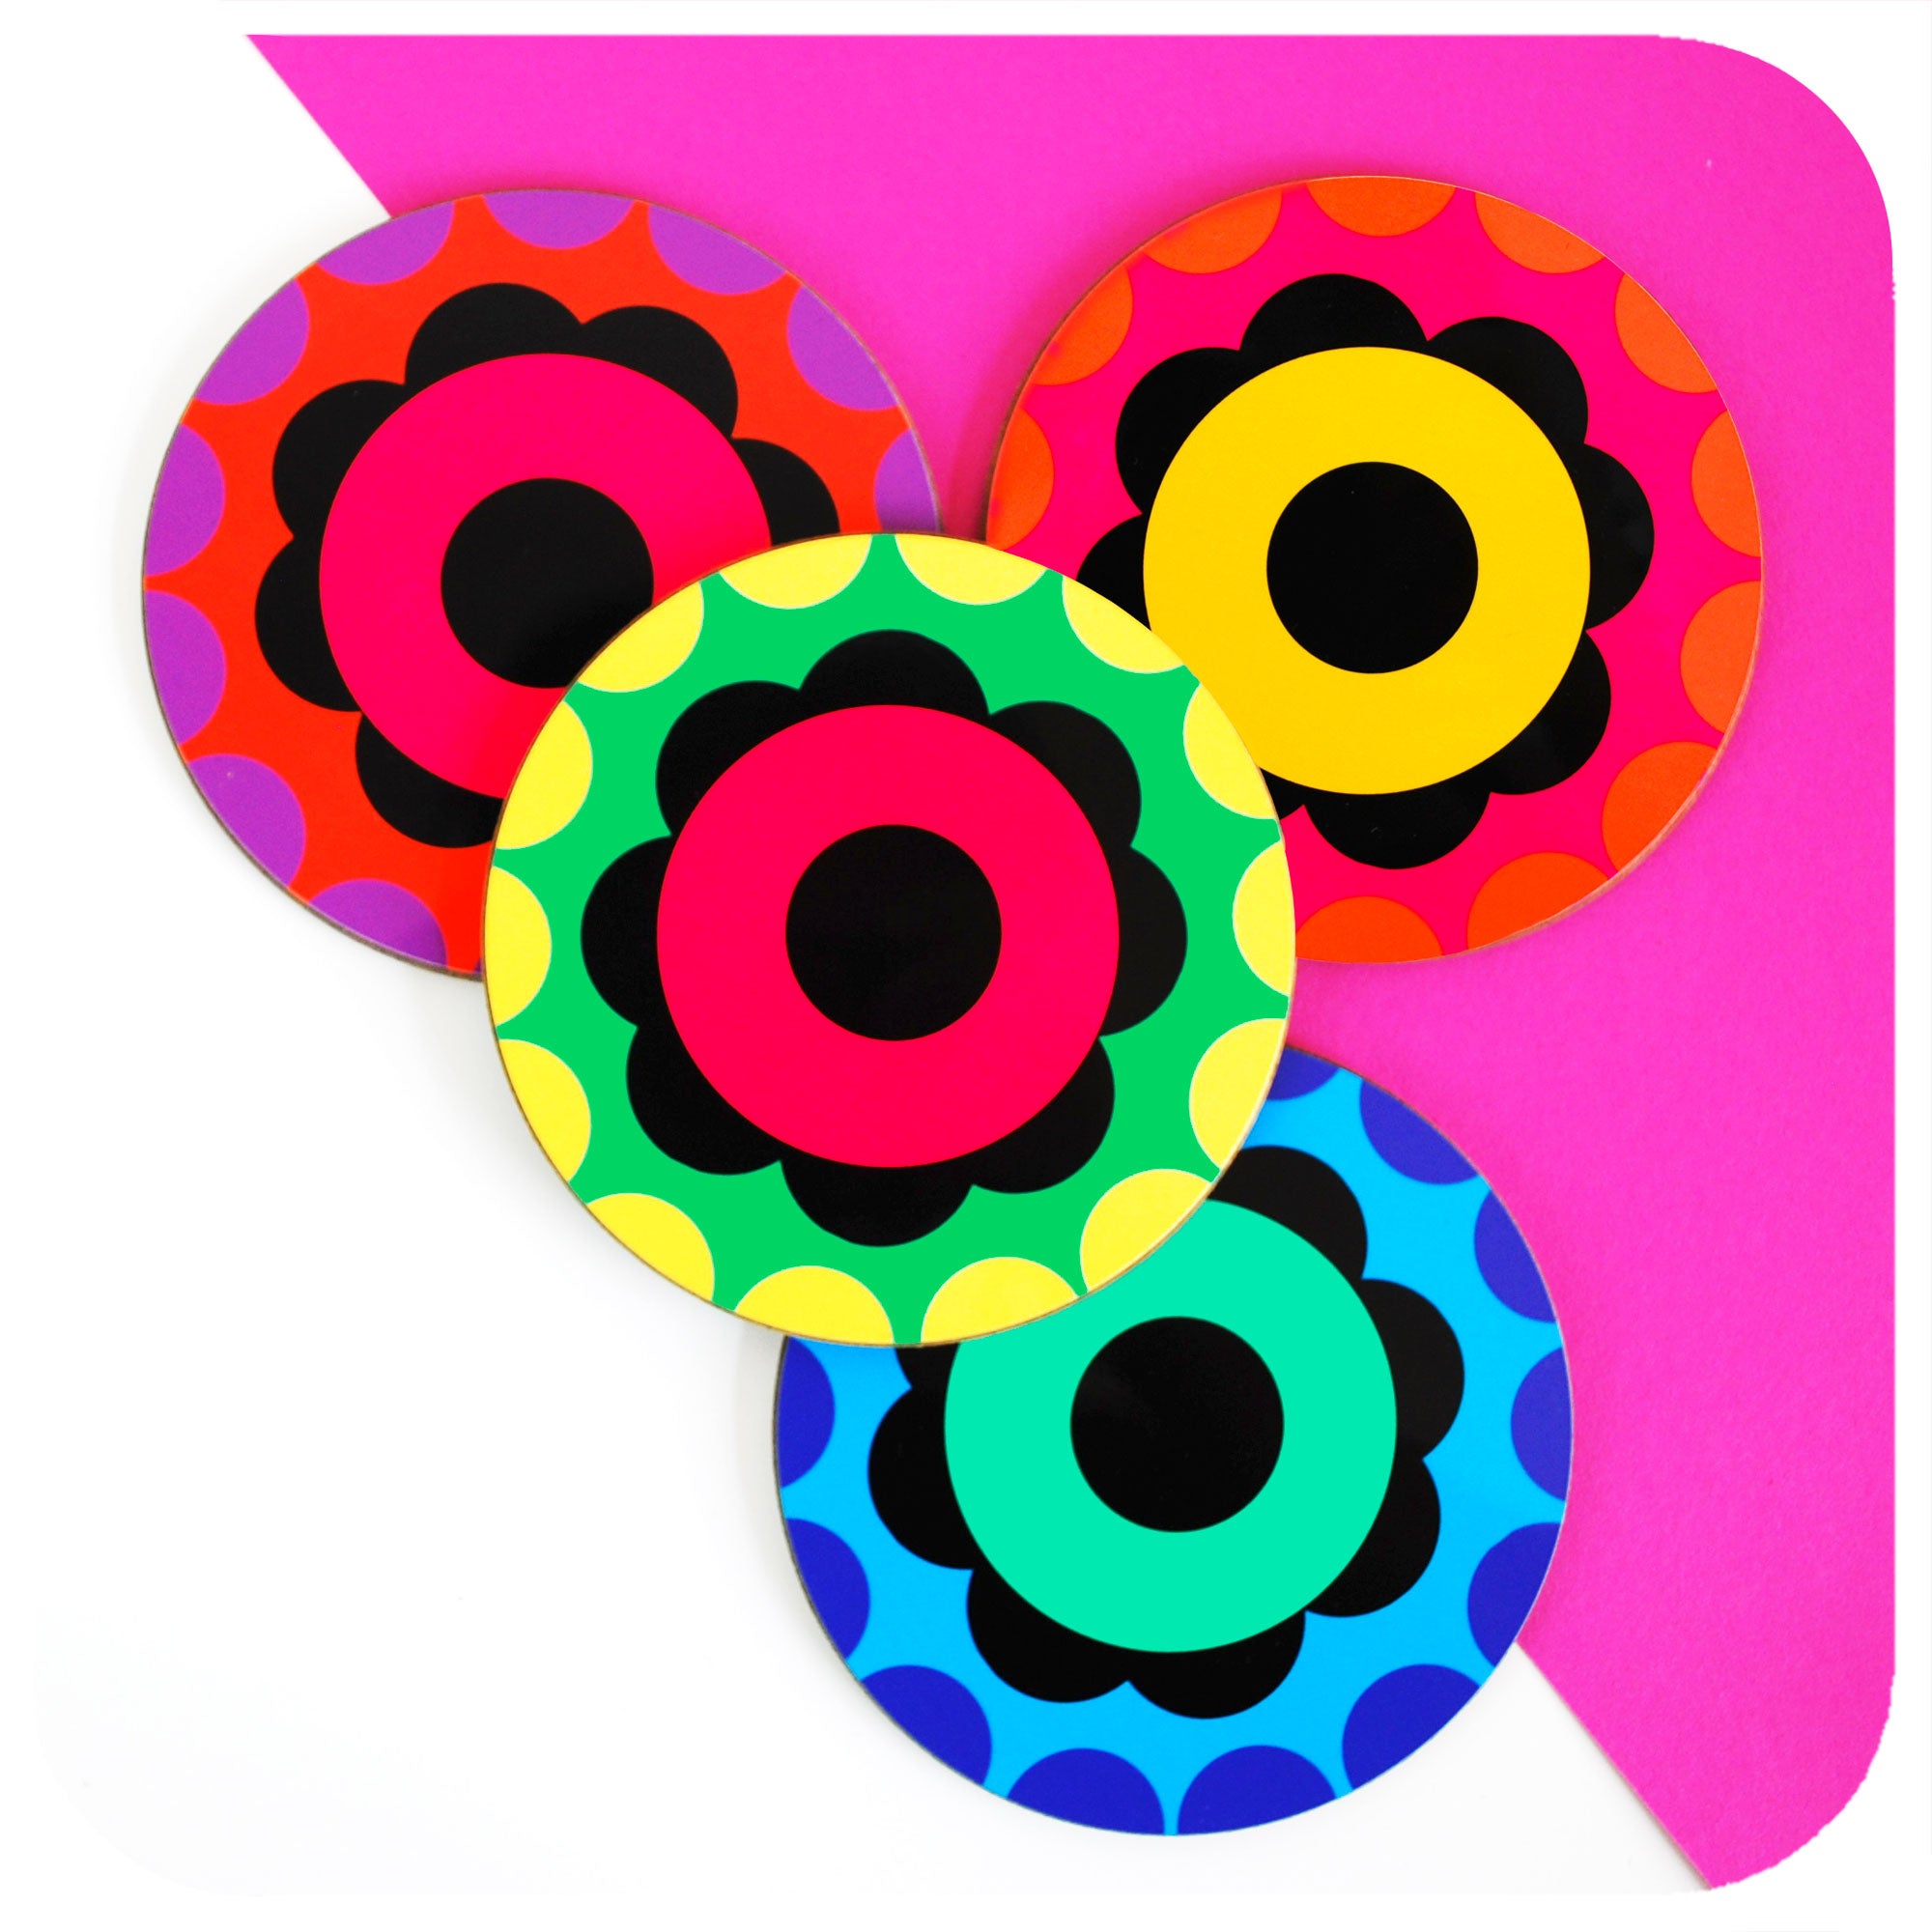 Four 60s Style Flower Power round coasters | The Inkabilly Emporium